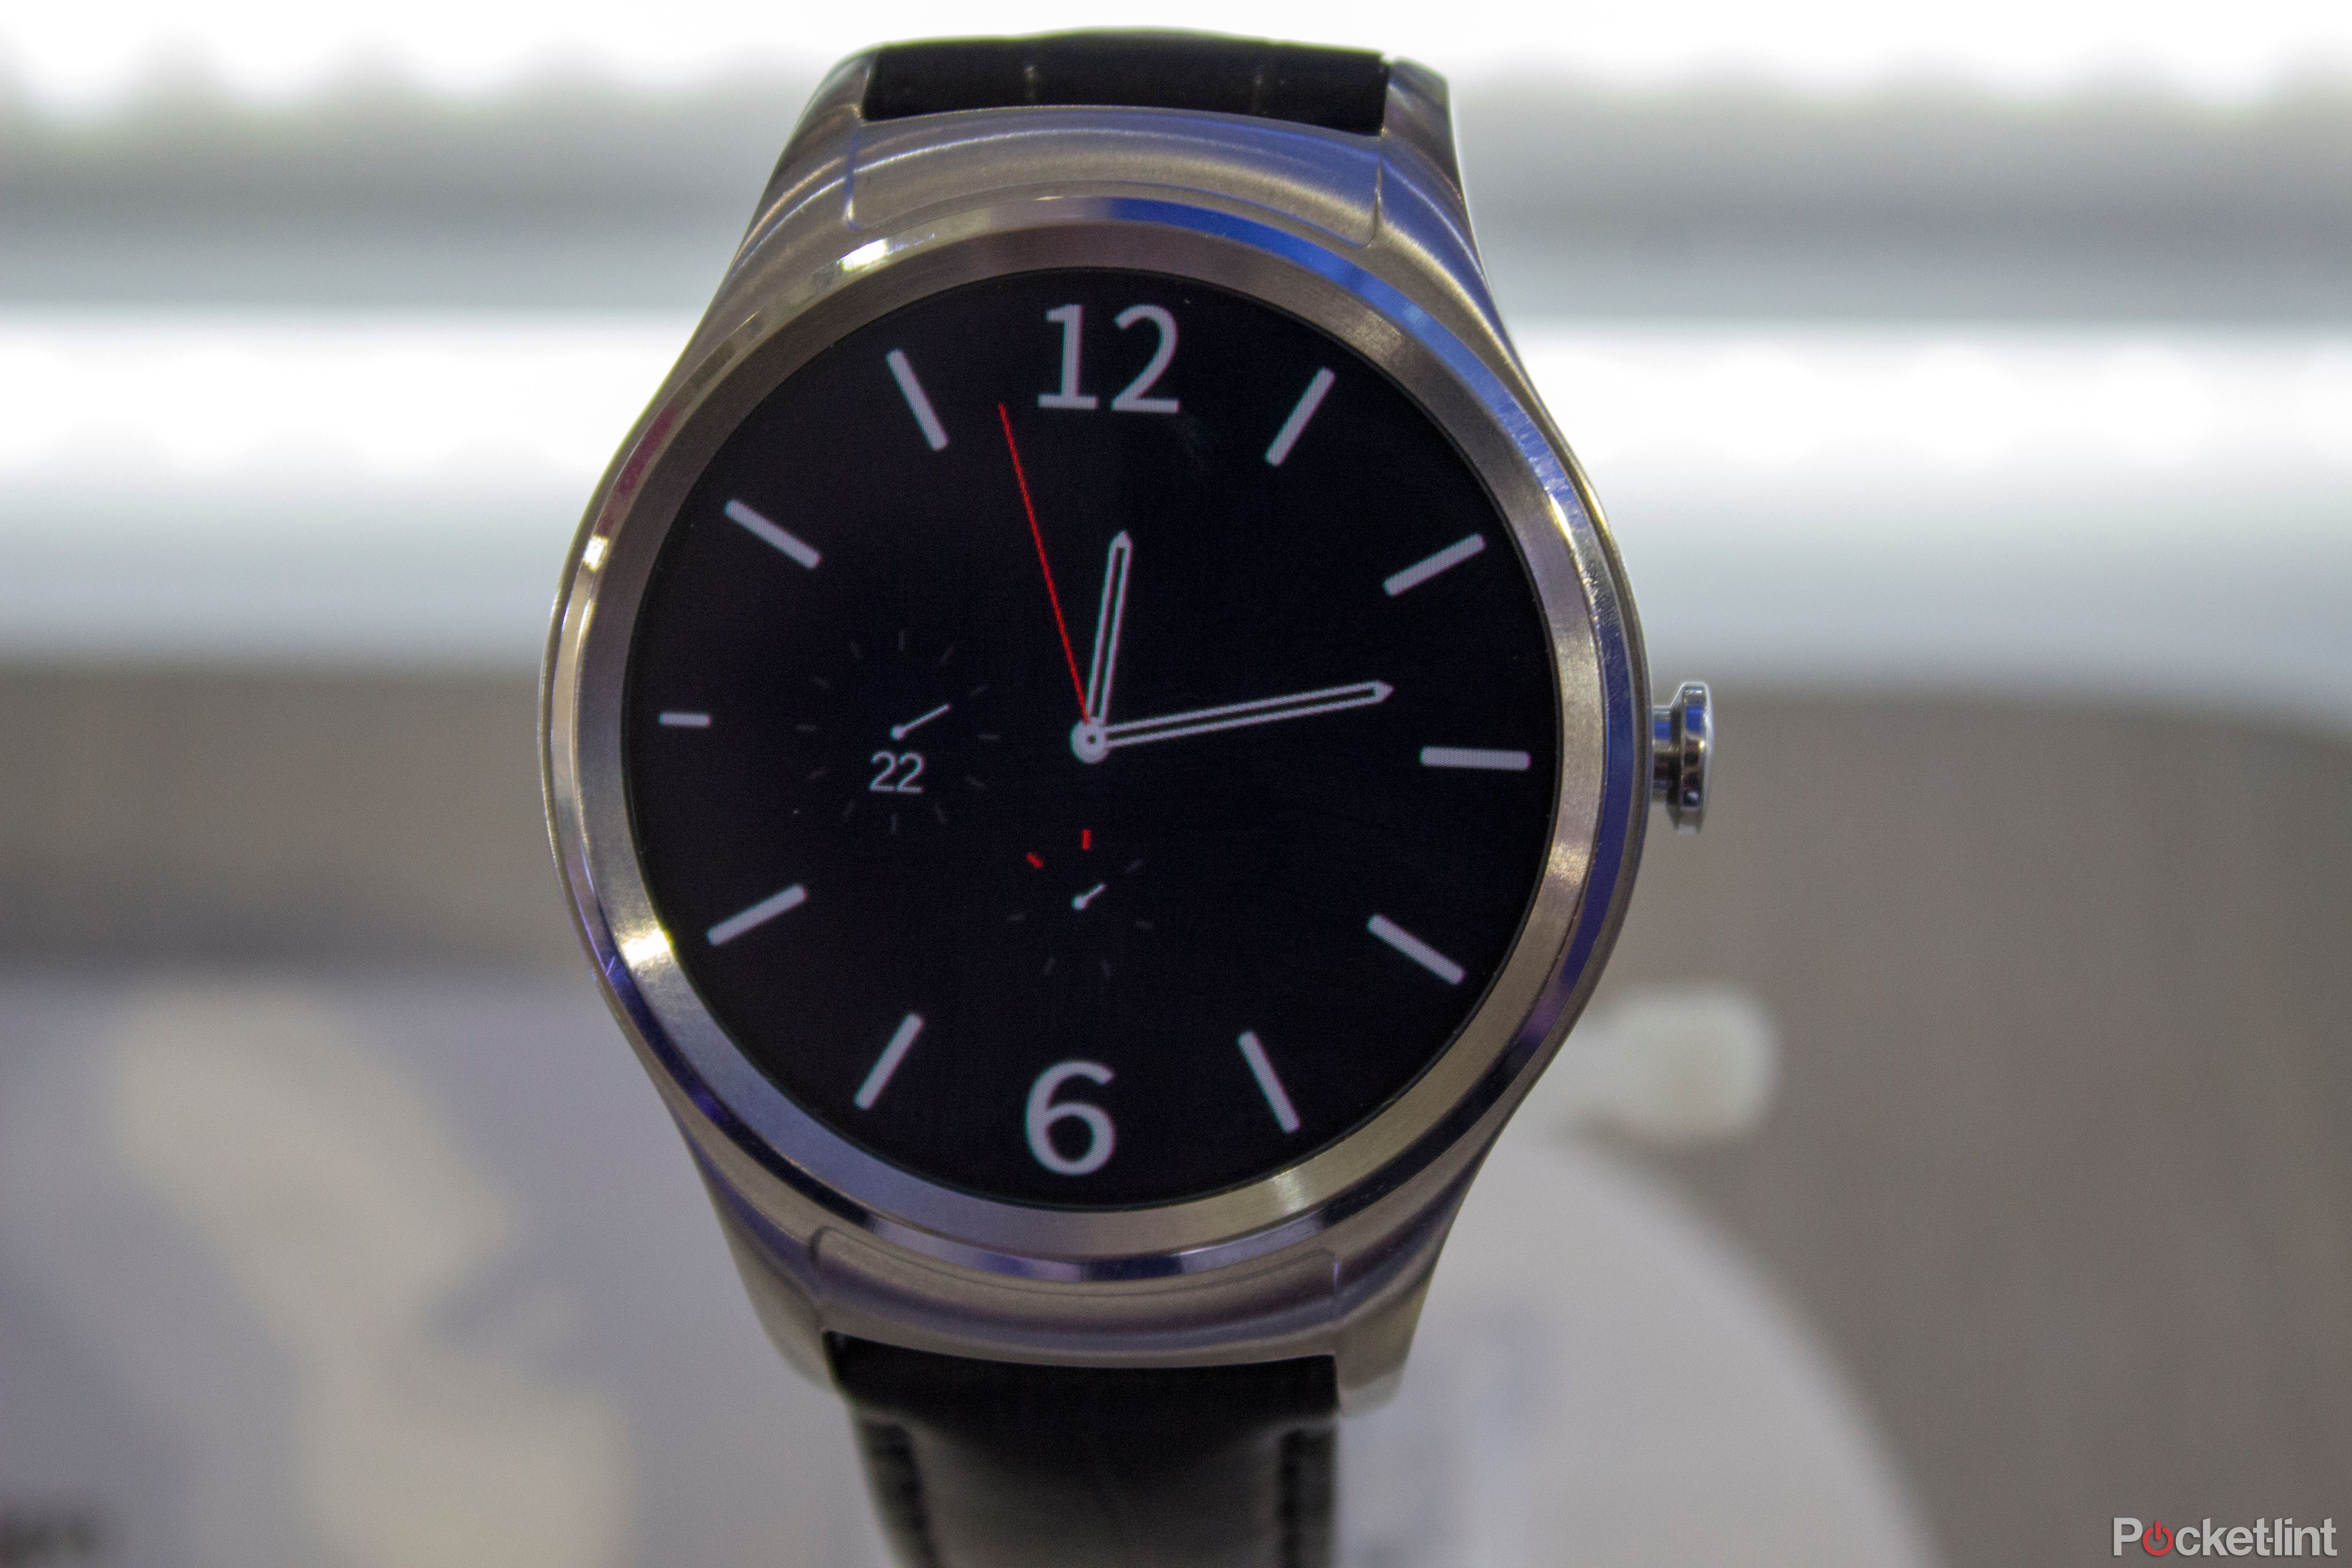 haier watch full android 6 0 marshmallow on your wrist image 1